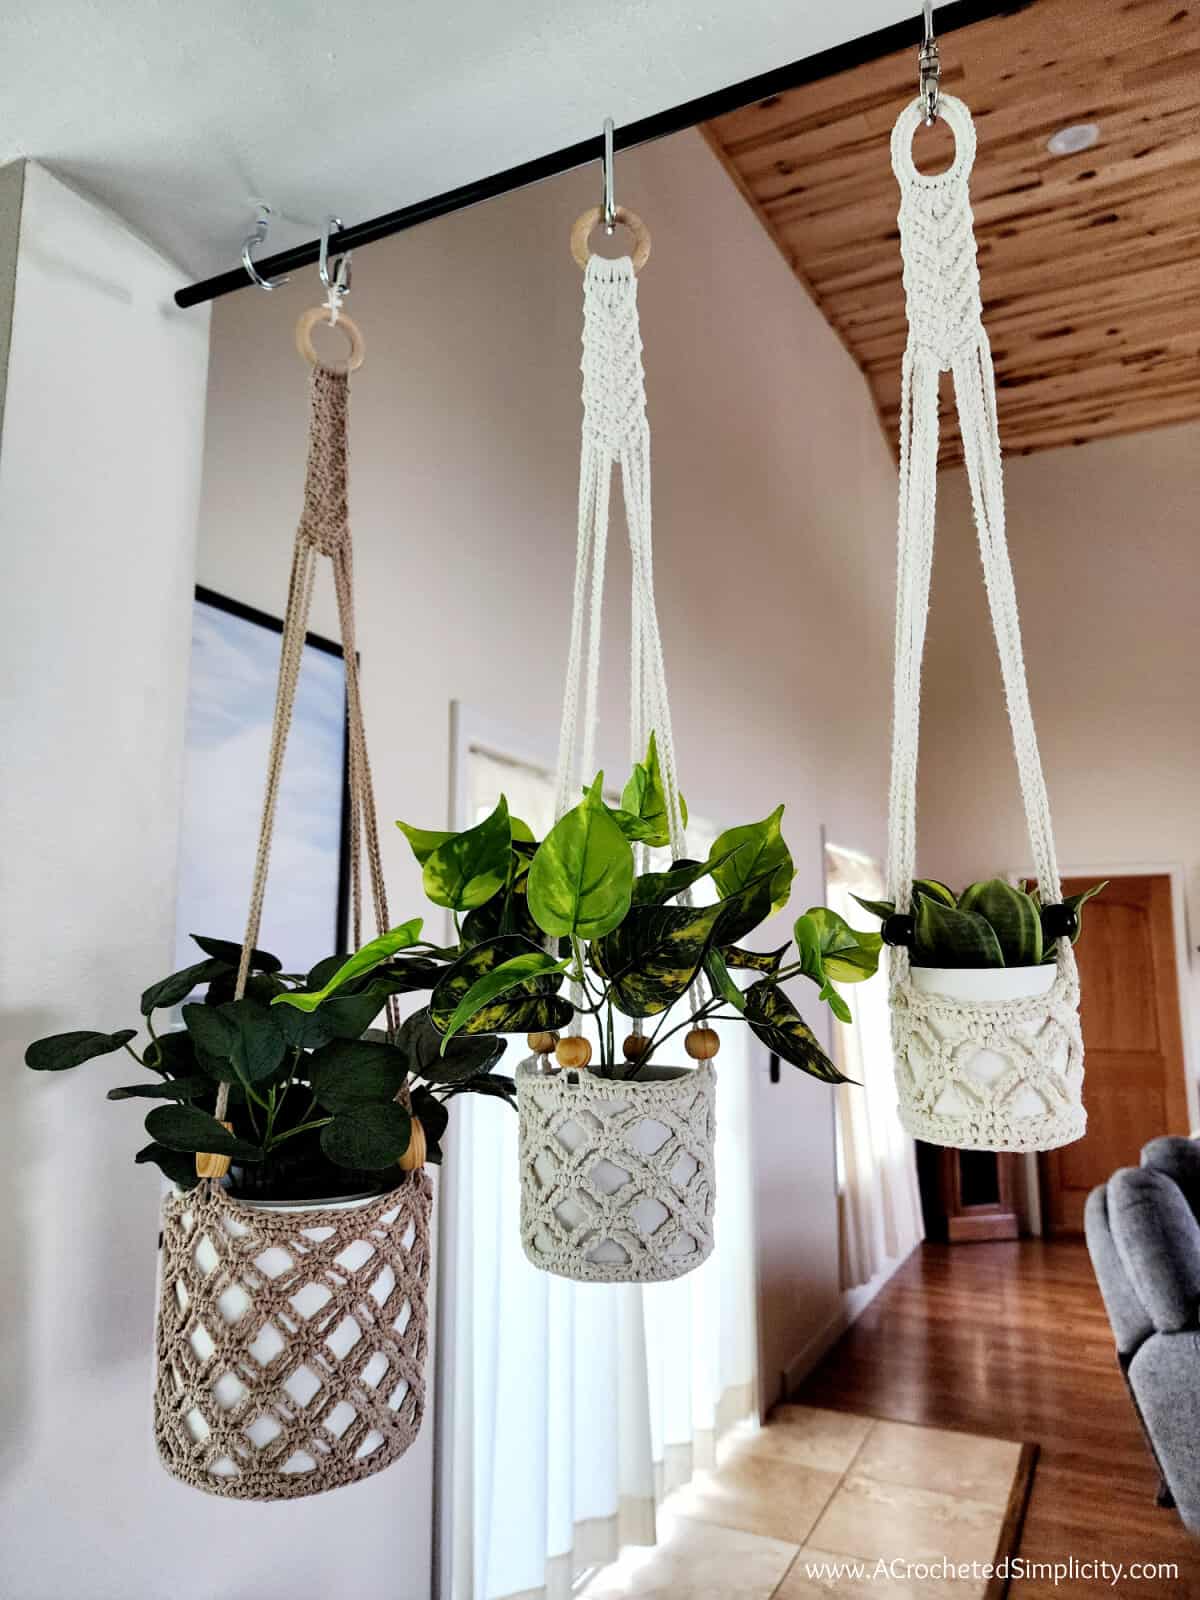 Three neutral colored crochet plant hangers with wooden beads.